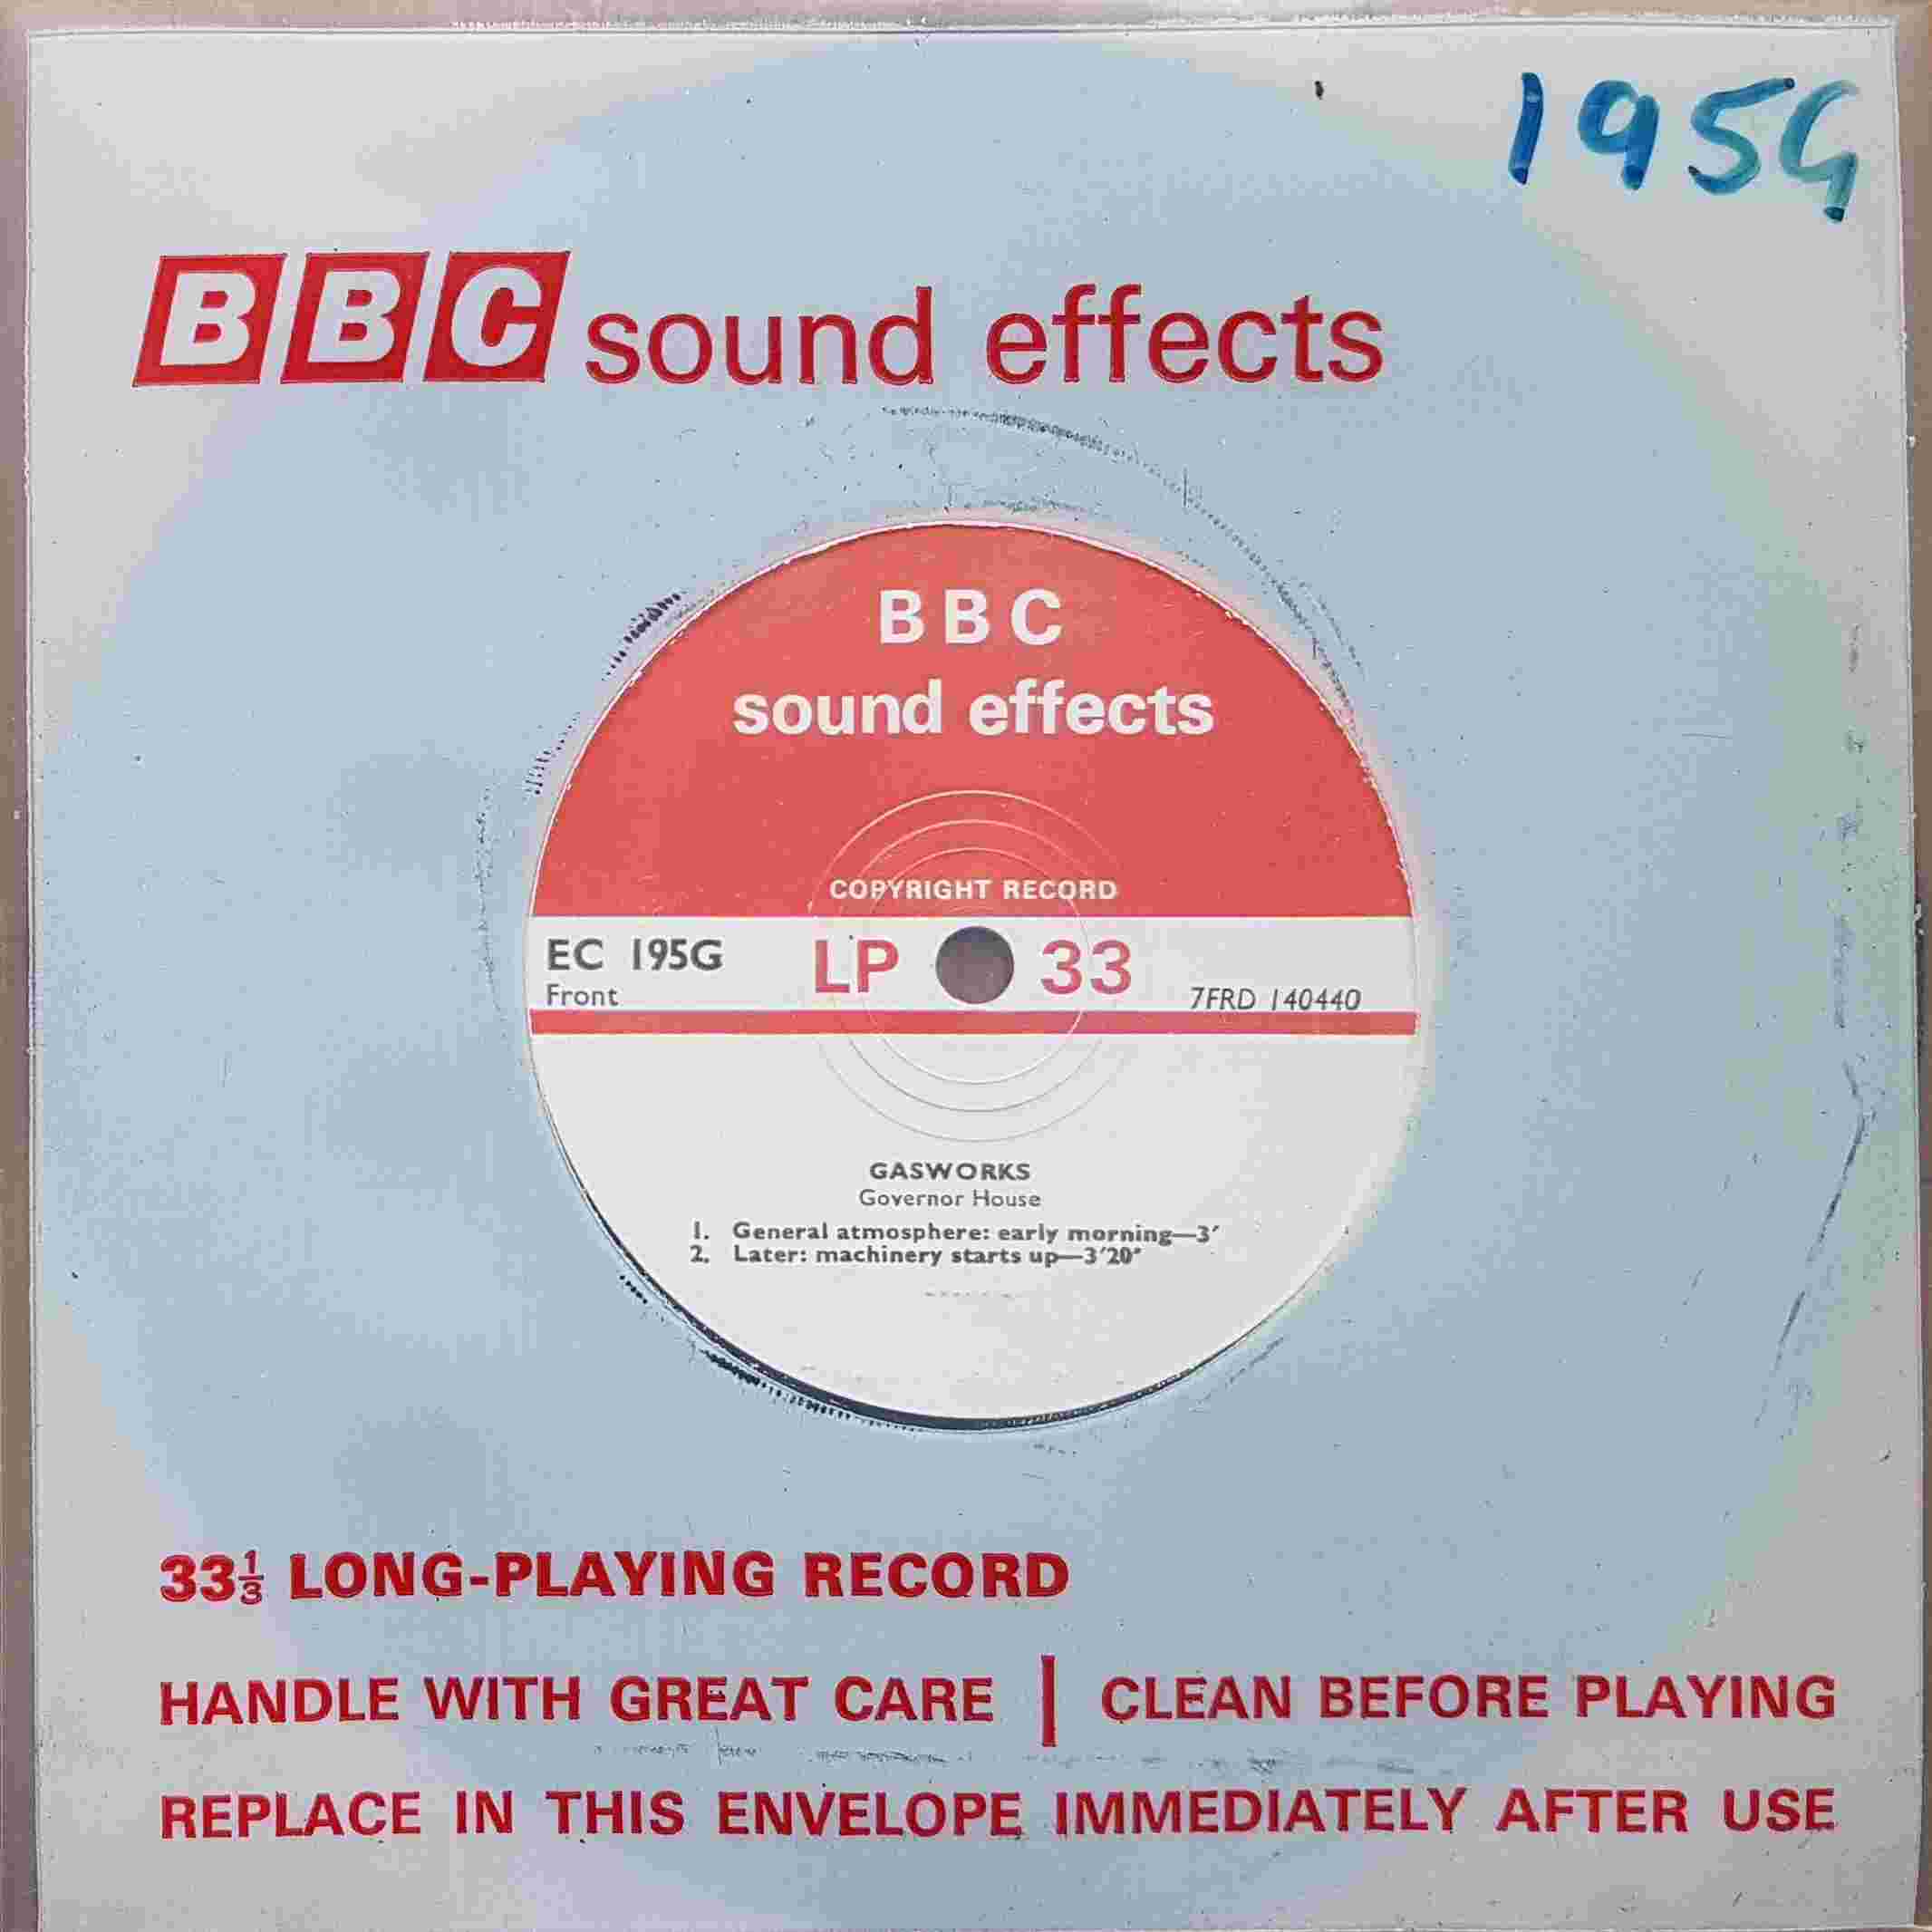 Picture of EC 195G Gasworks: Governor House by artist Not registered from the BBC singles - Records and Tapes library